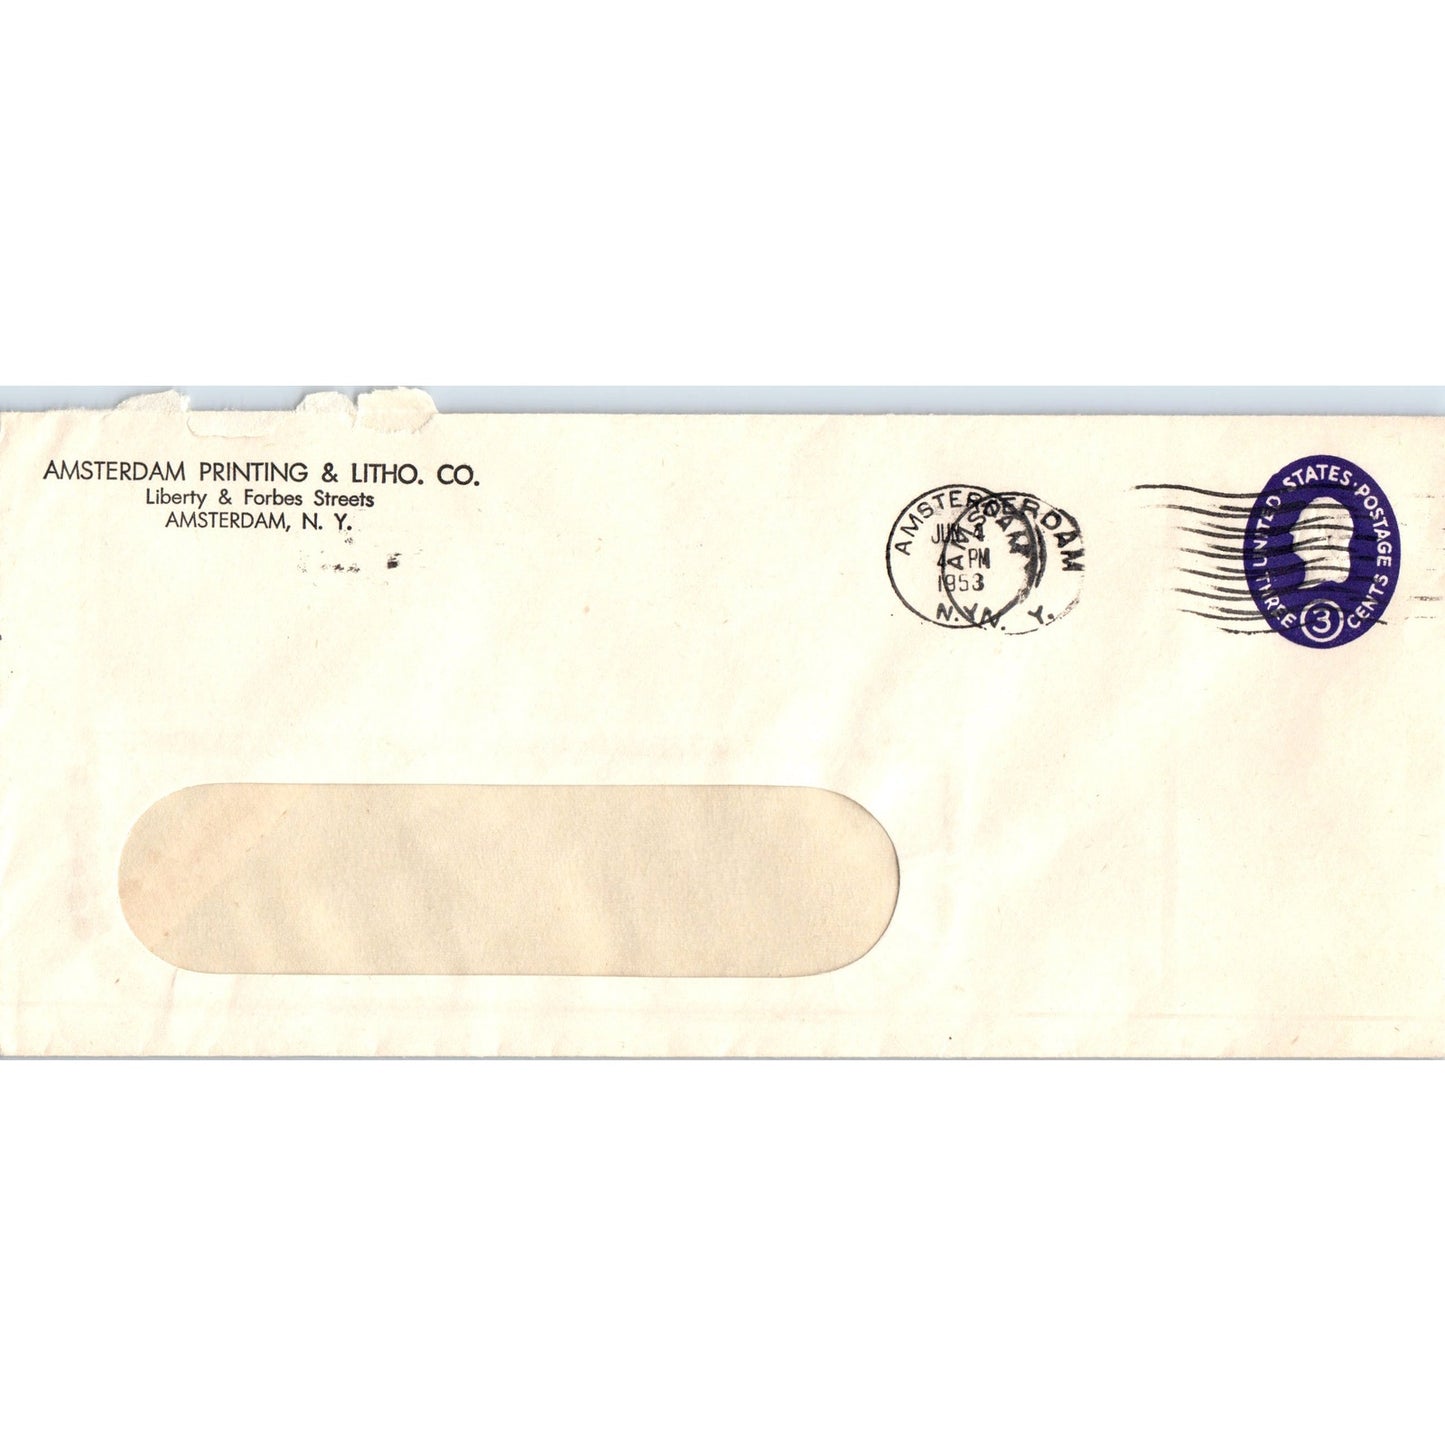 1953 Amsterdam Printing & Litho. Co. Double Cancel Postal Cover Envelope TH9-L2